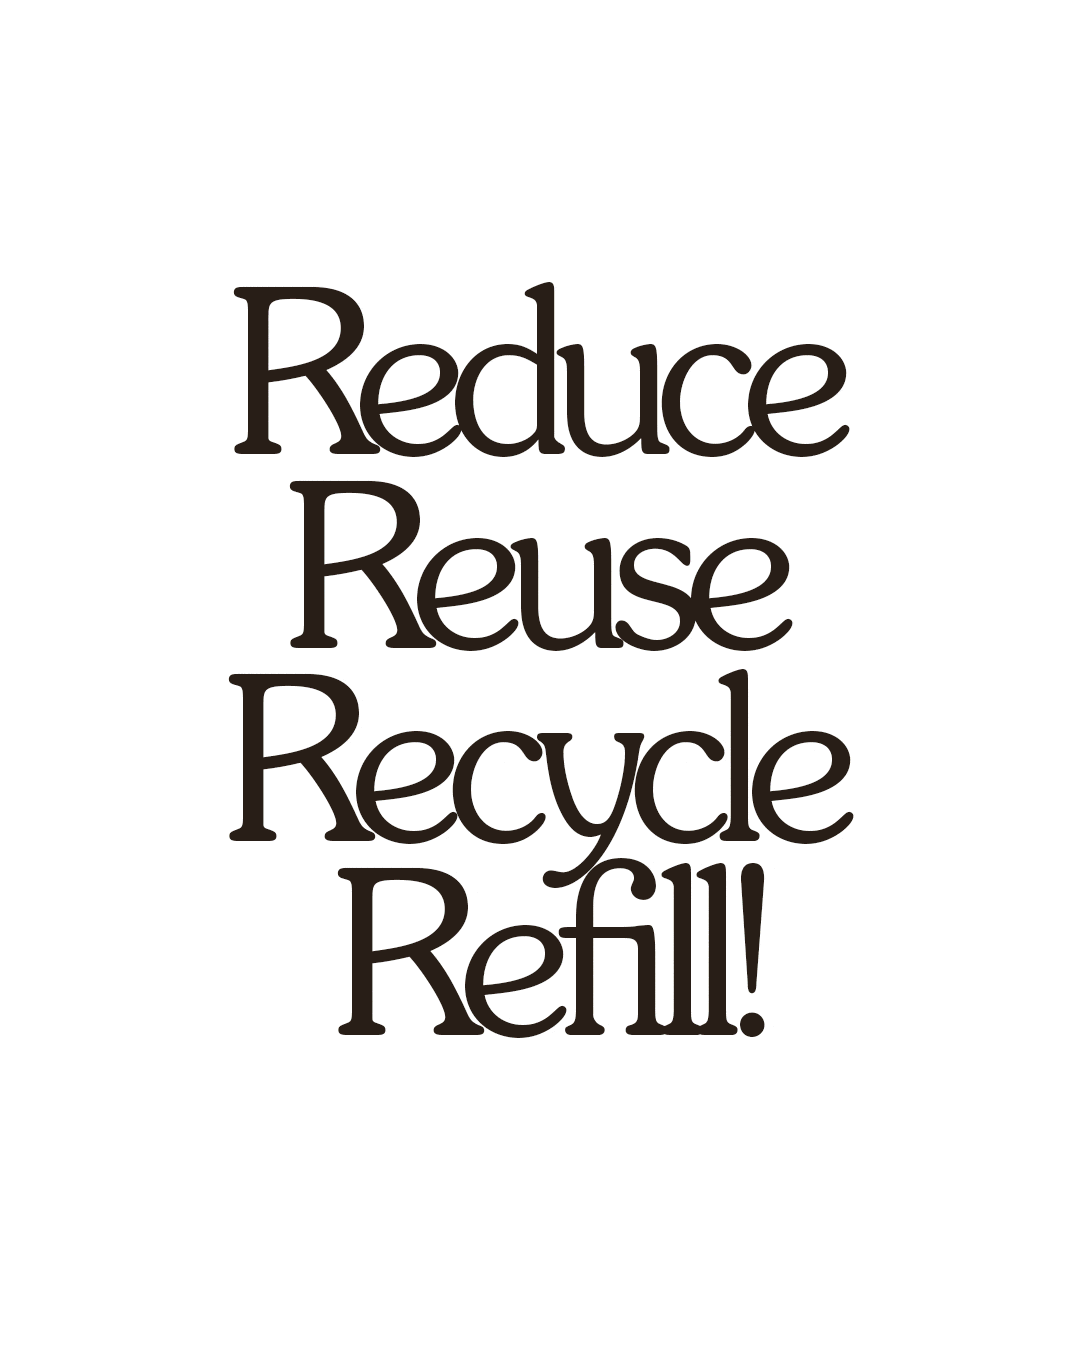 REDUCE REUSE RECYCLE REFILL!